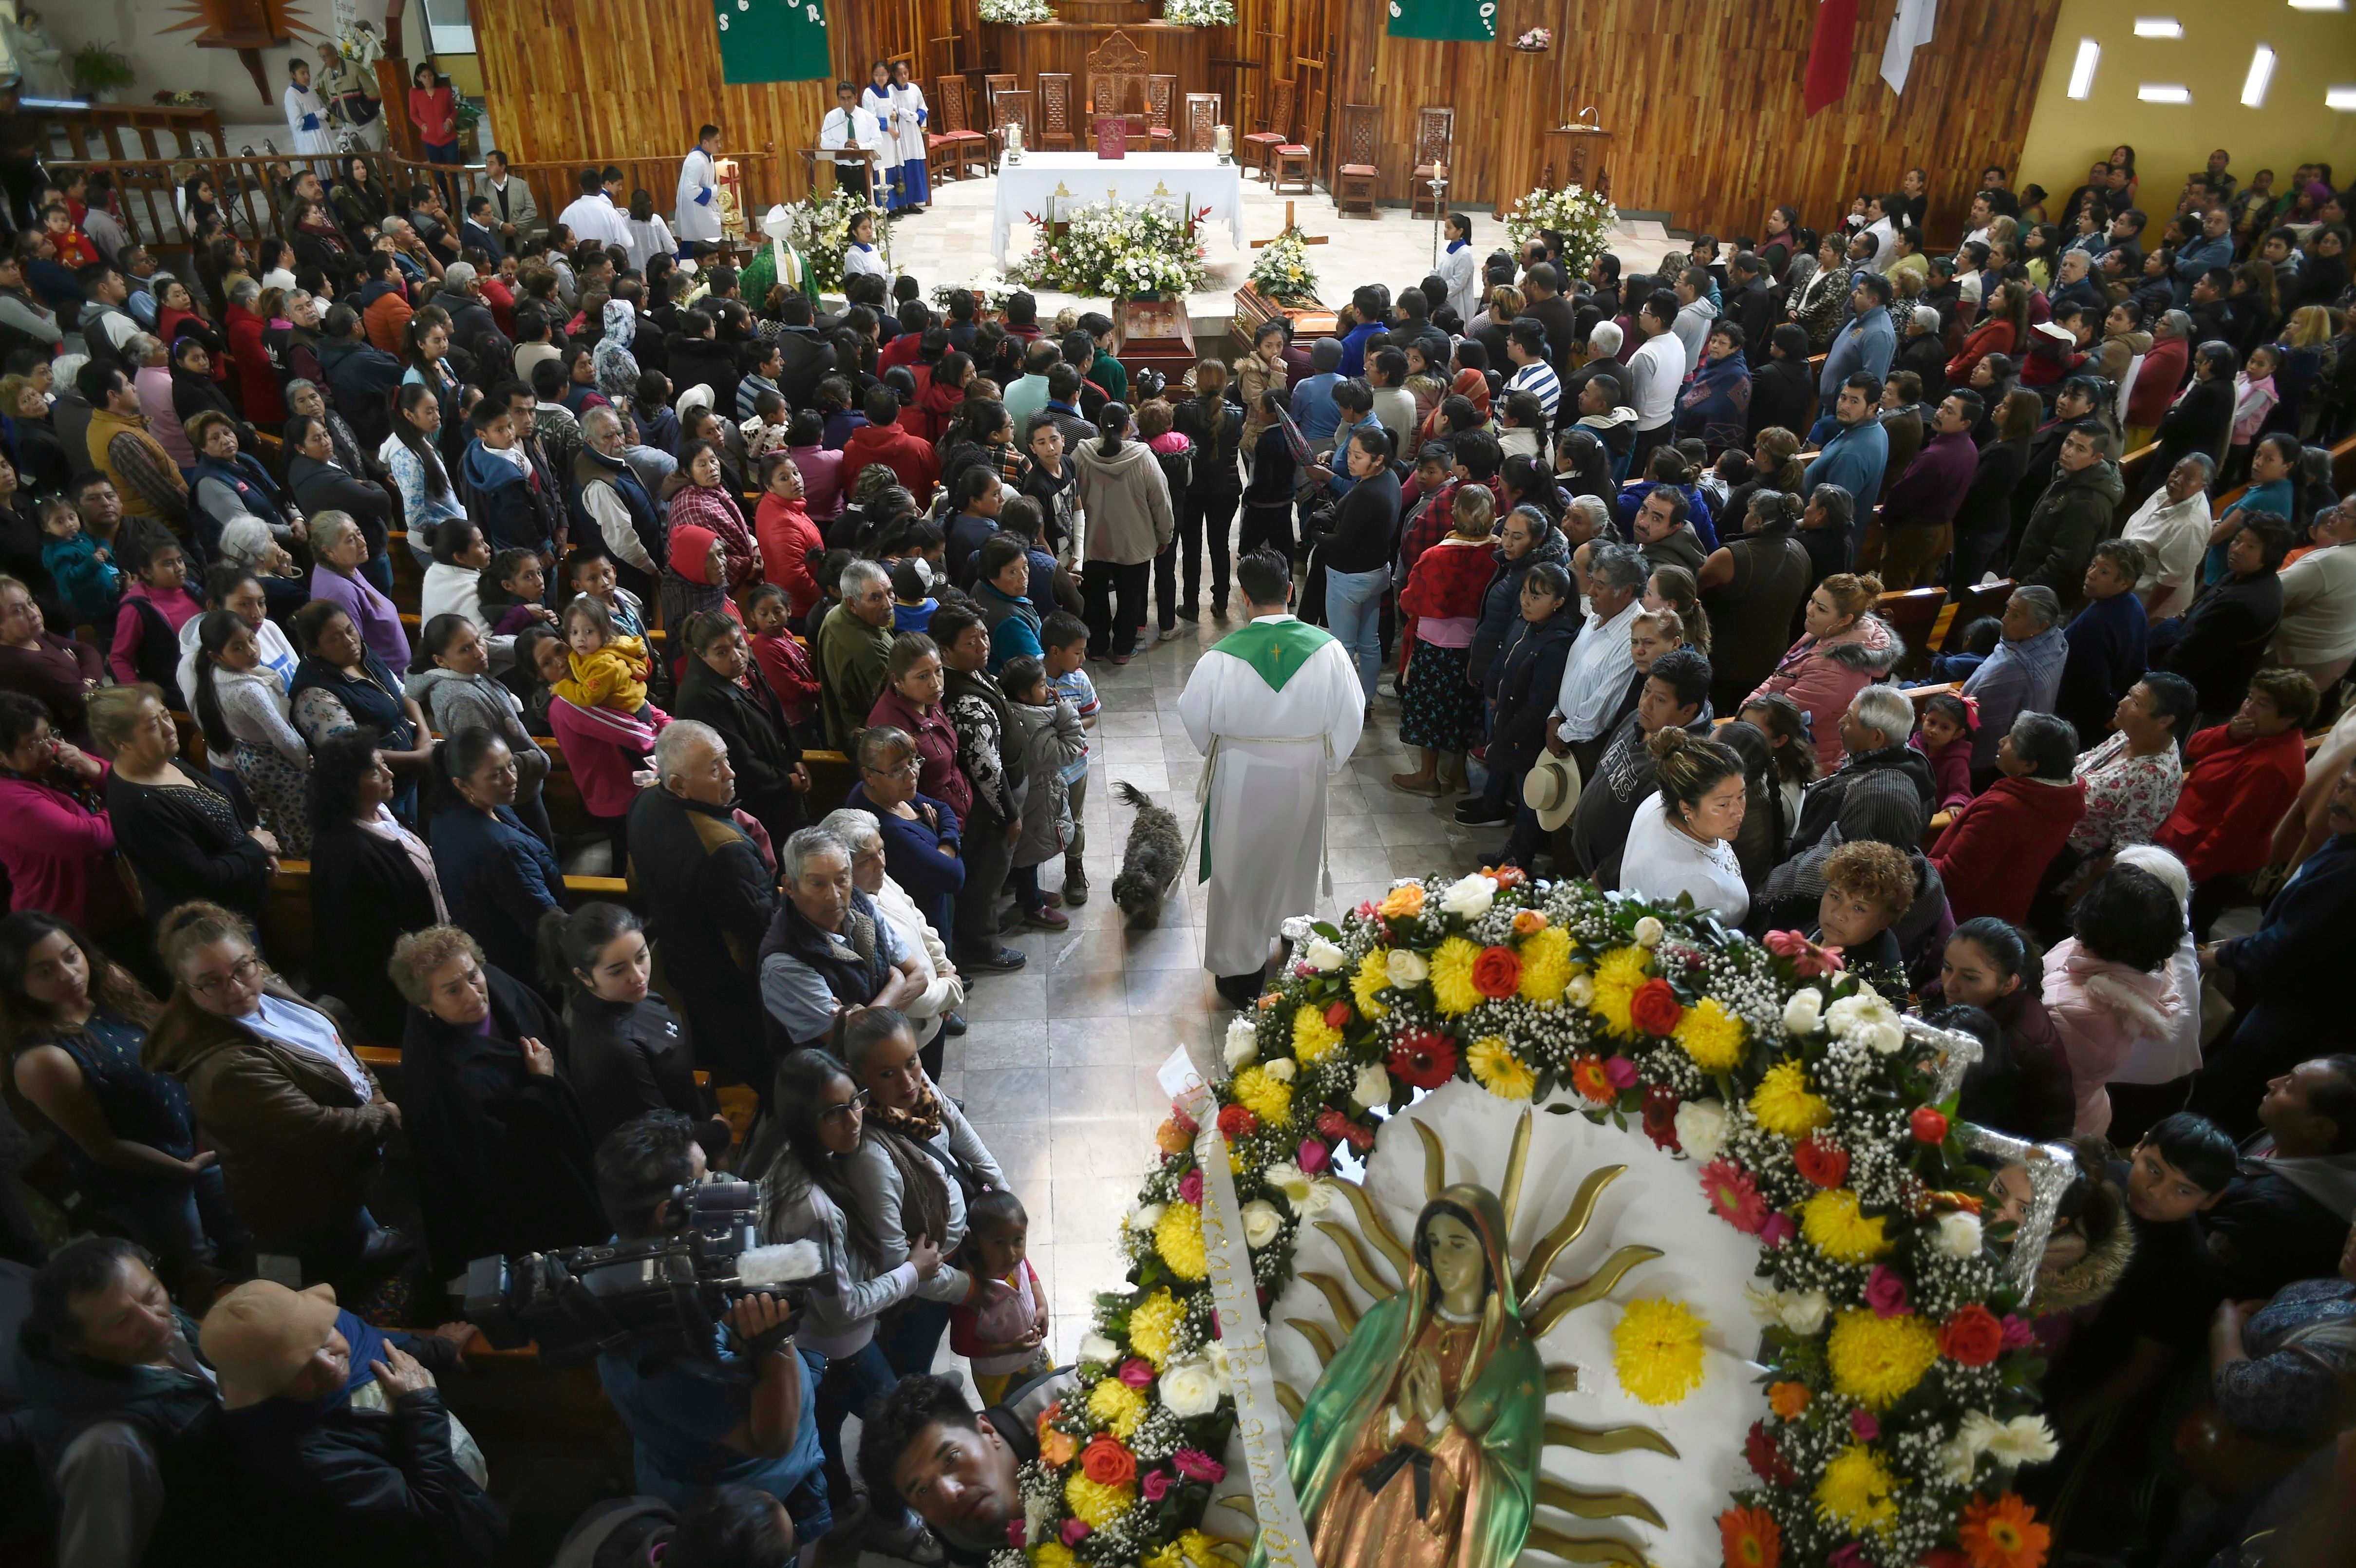 TOPSHOT - Relatives of three of the 73 people killed in a massive blaze triggered by a leaky pipeline in Tlahuelilpan, attend their funeral in Teltipan de Juarez community, in Hidalgo state, Mexico on January 20, 2019. - An explosion and fire in central Mexico killed at least 73 people after hundreds swarmed to the site of an illegal fuel-line tap to gather gasoline amid a government crackdown on fuel theft, officials said. (Photo by ALFREDO ESTRELLA / AFP) (Photo credit should read ALFREDO ESTRELLA/AFP/Getty Images)